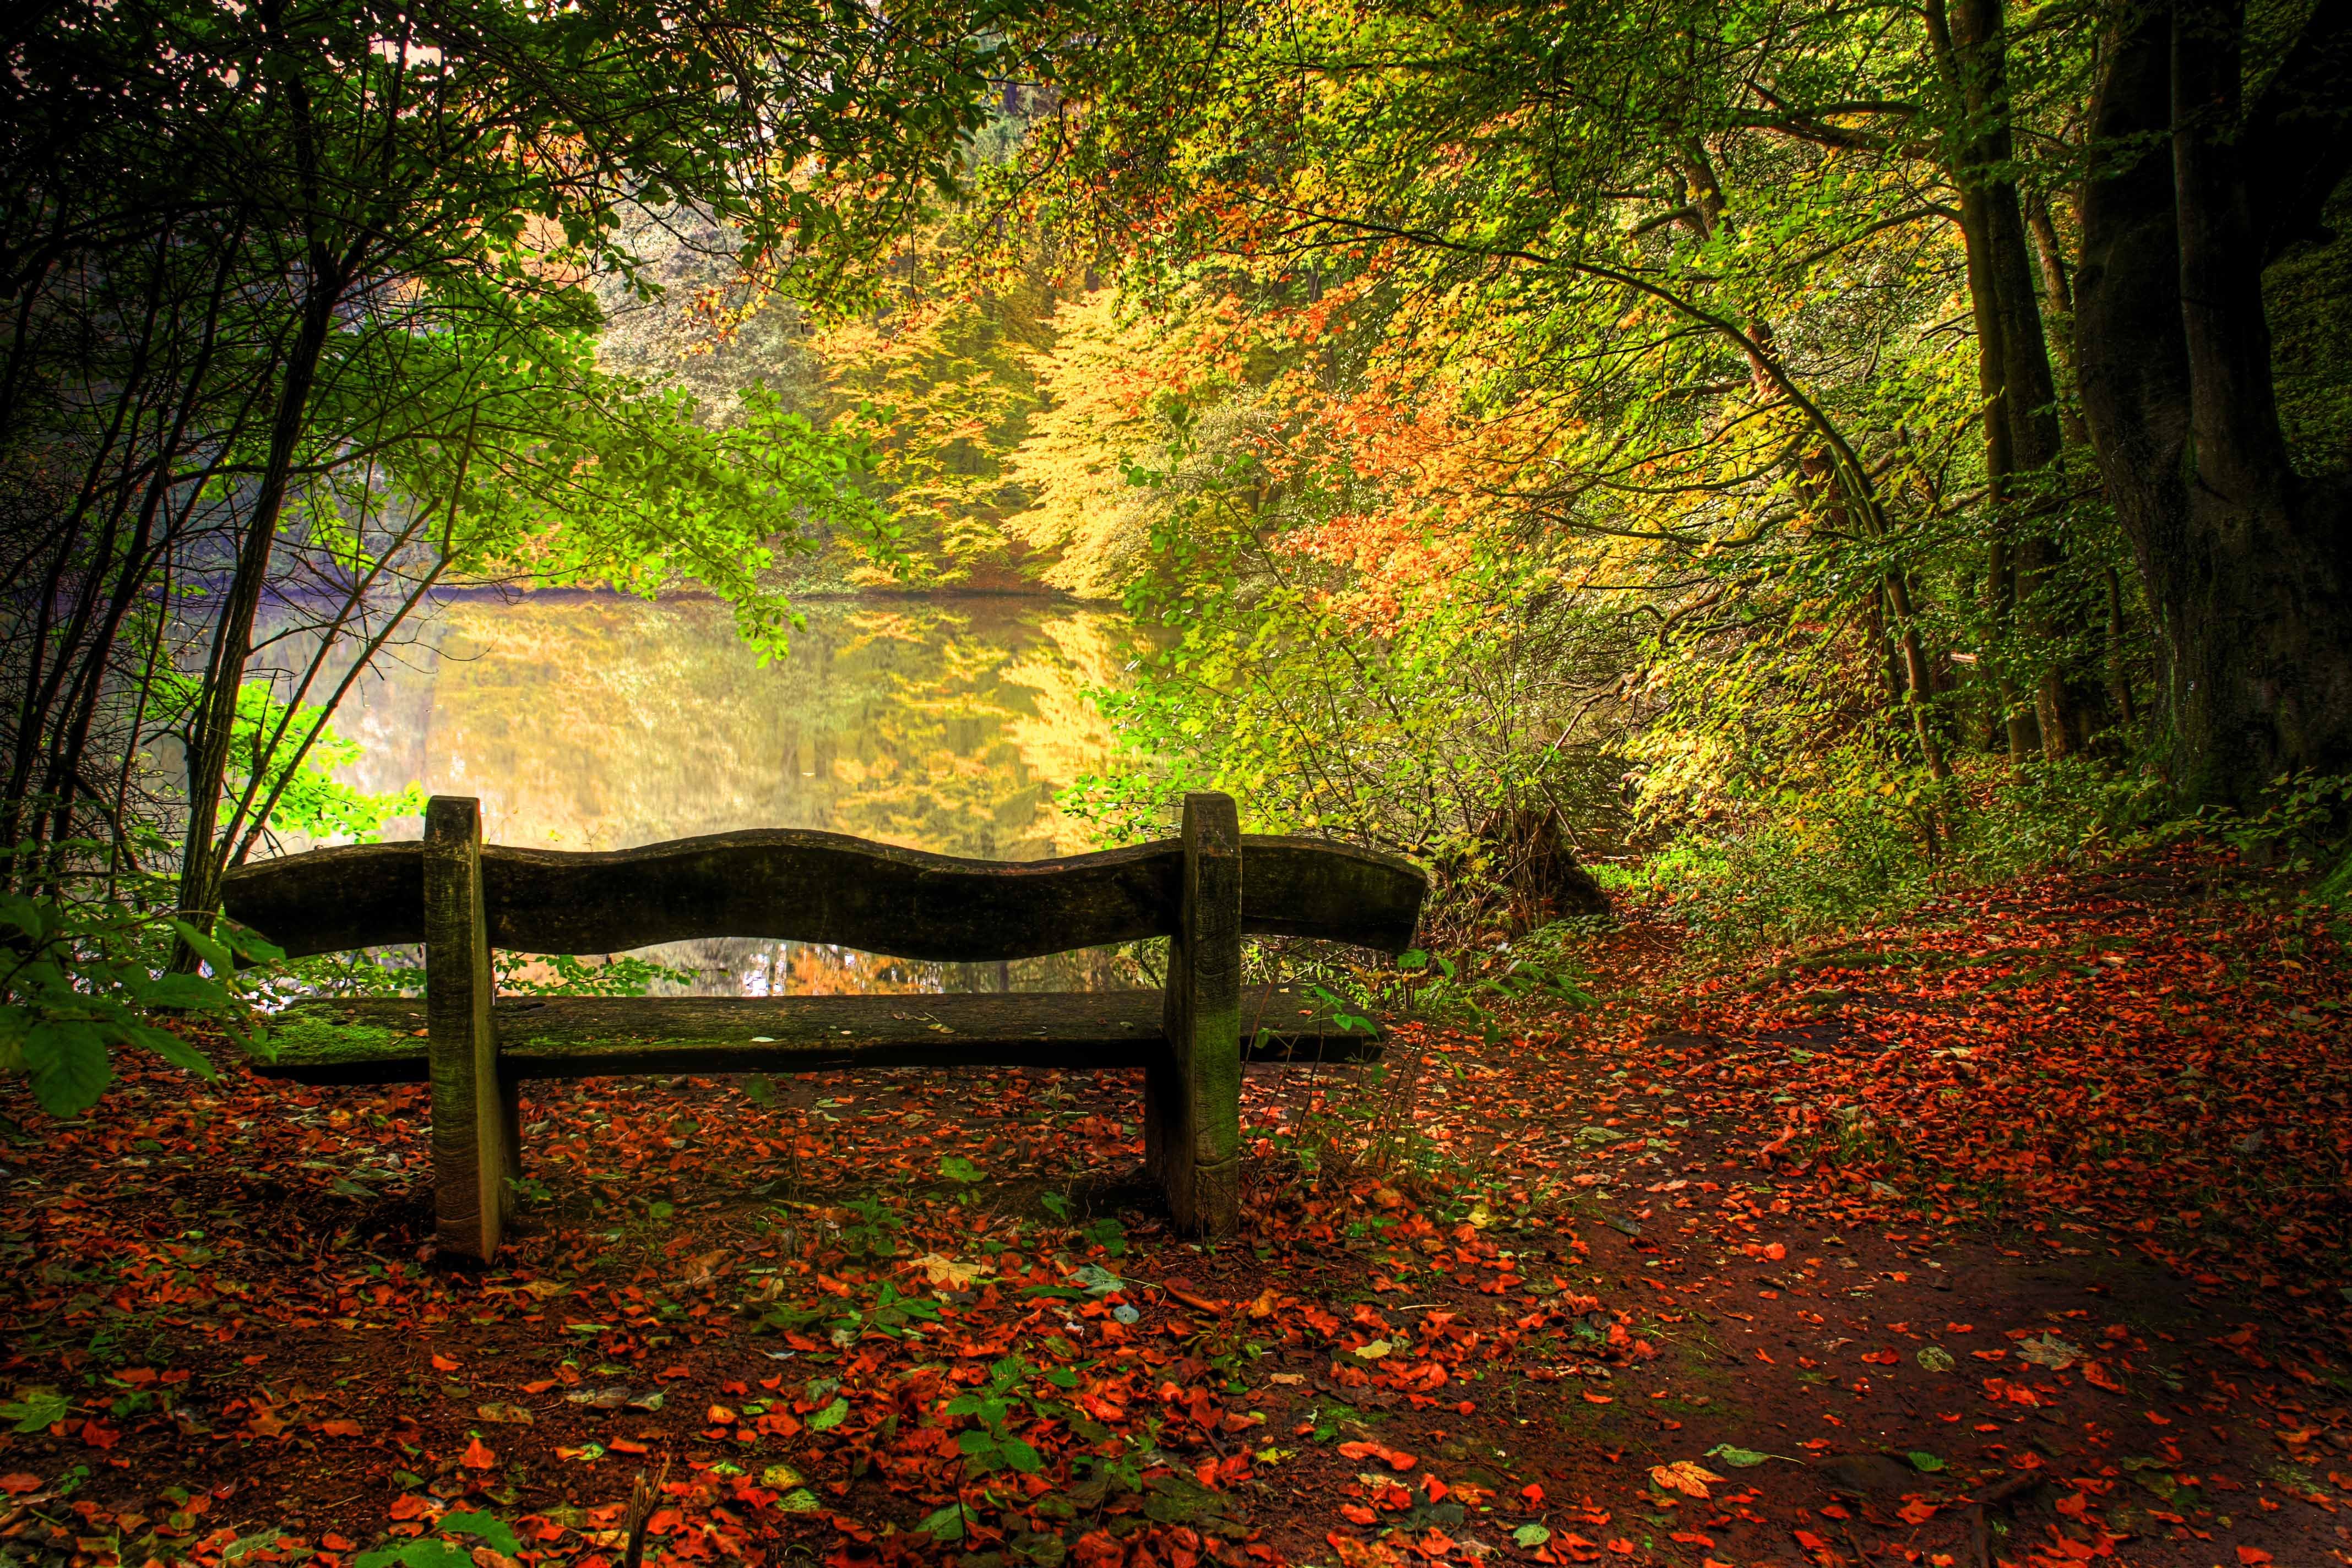 Autumn HDr Beautiful Beauty Benches Cool Fall Foliage